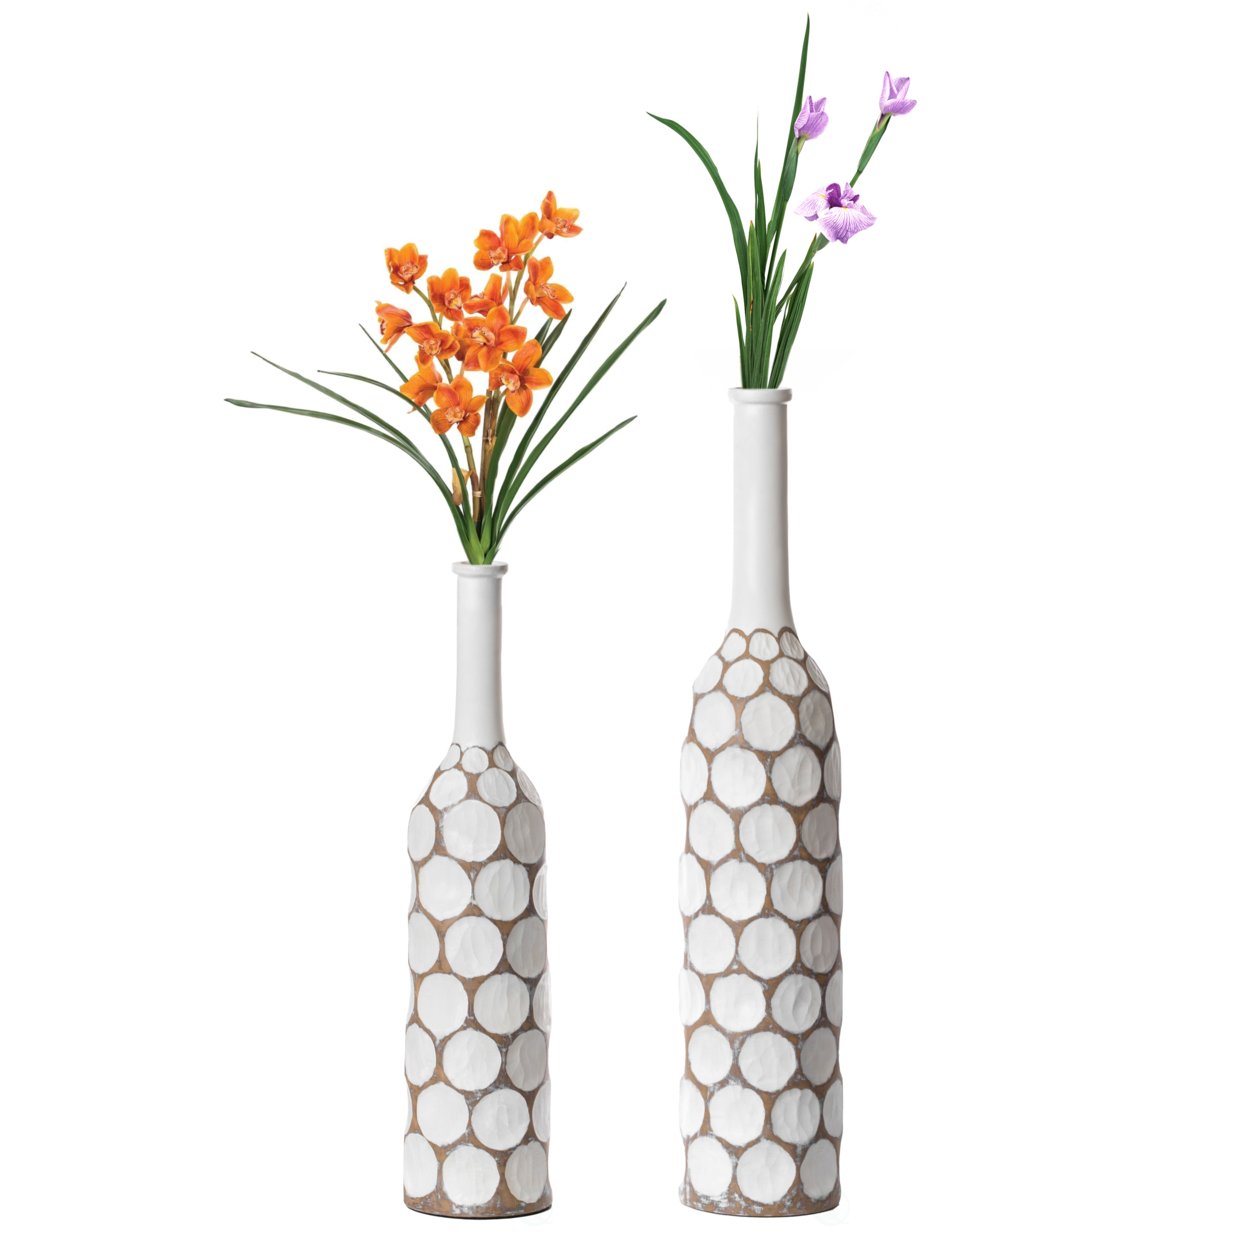 Decorative Contemporary Floor Vase White Carved Divot Bubble Design With Tall Neck - Set Of 2